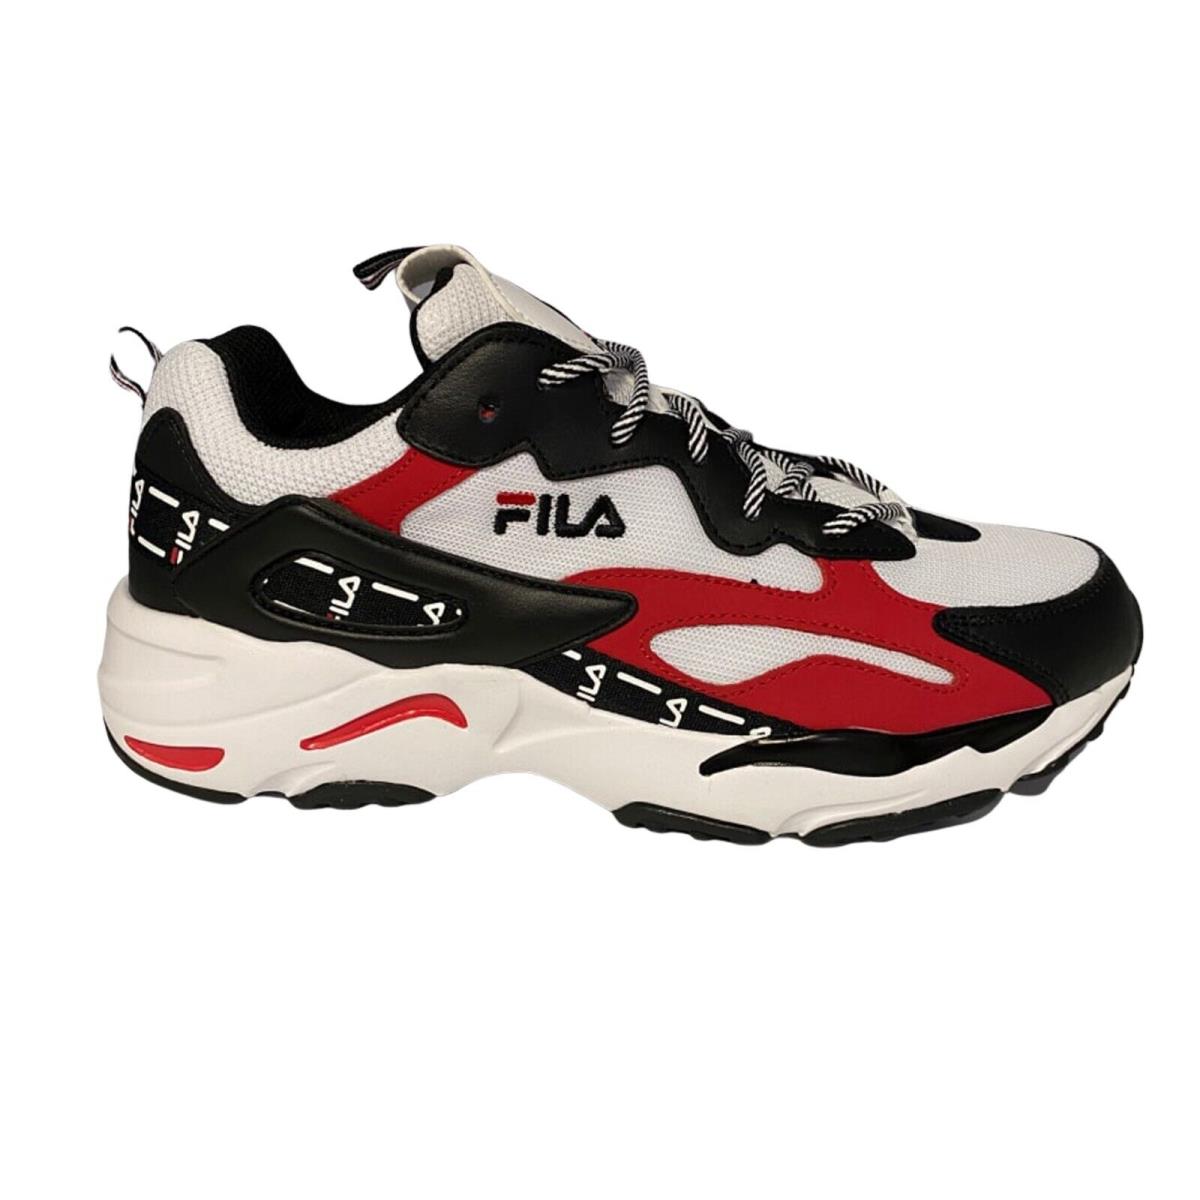 Fila Men`s Ray Tracer Tarvos 1RM01024 Casual Shoes Size 9.5 - White, Black, Red